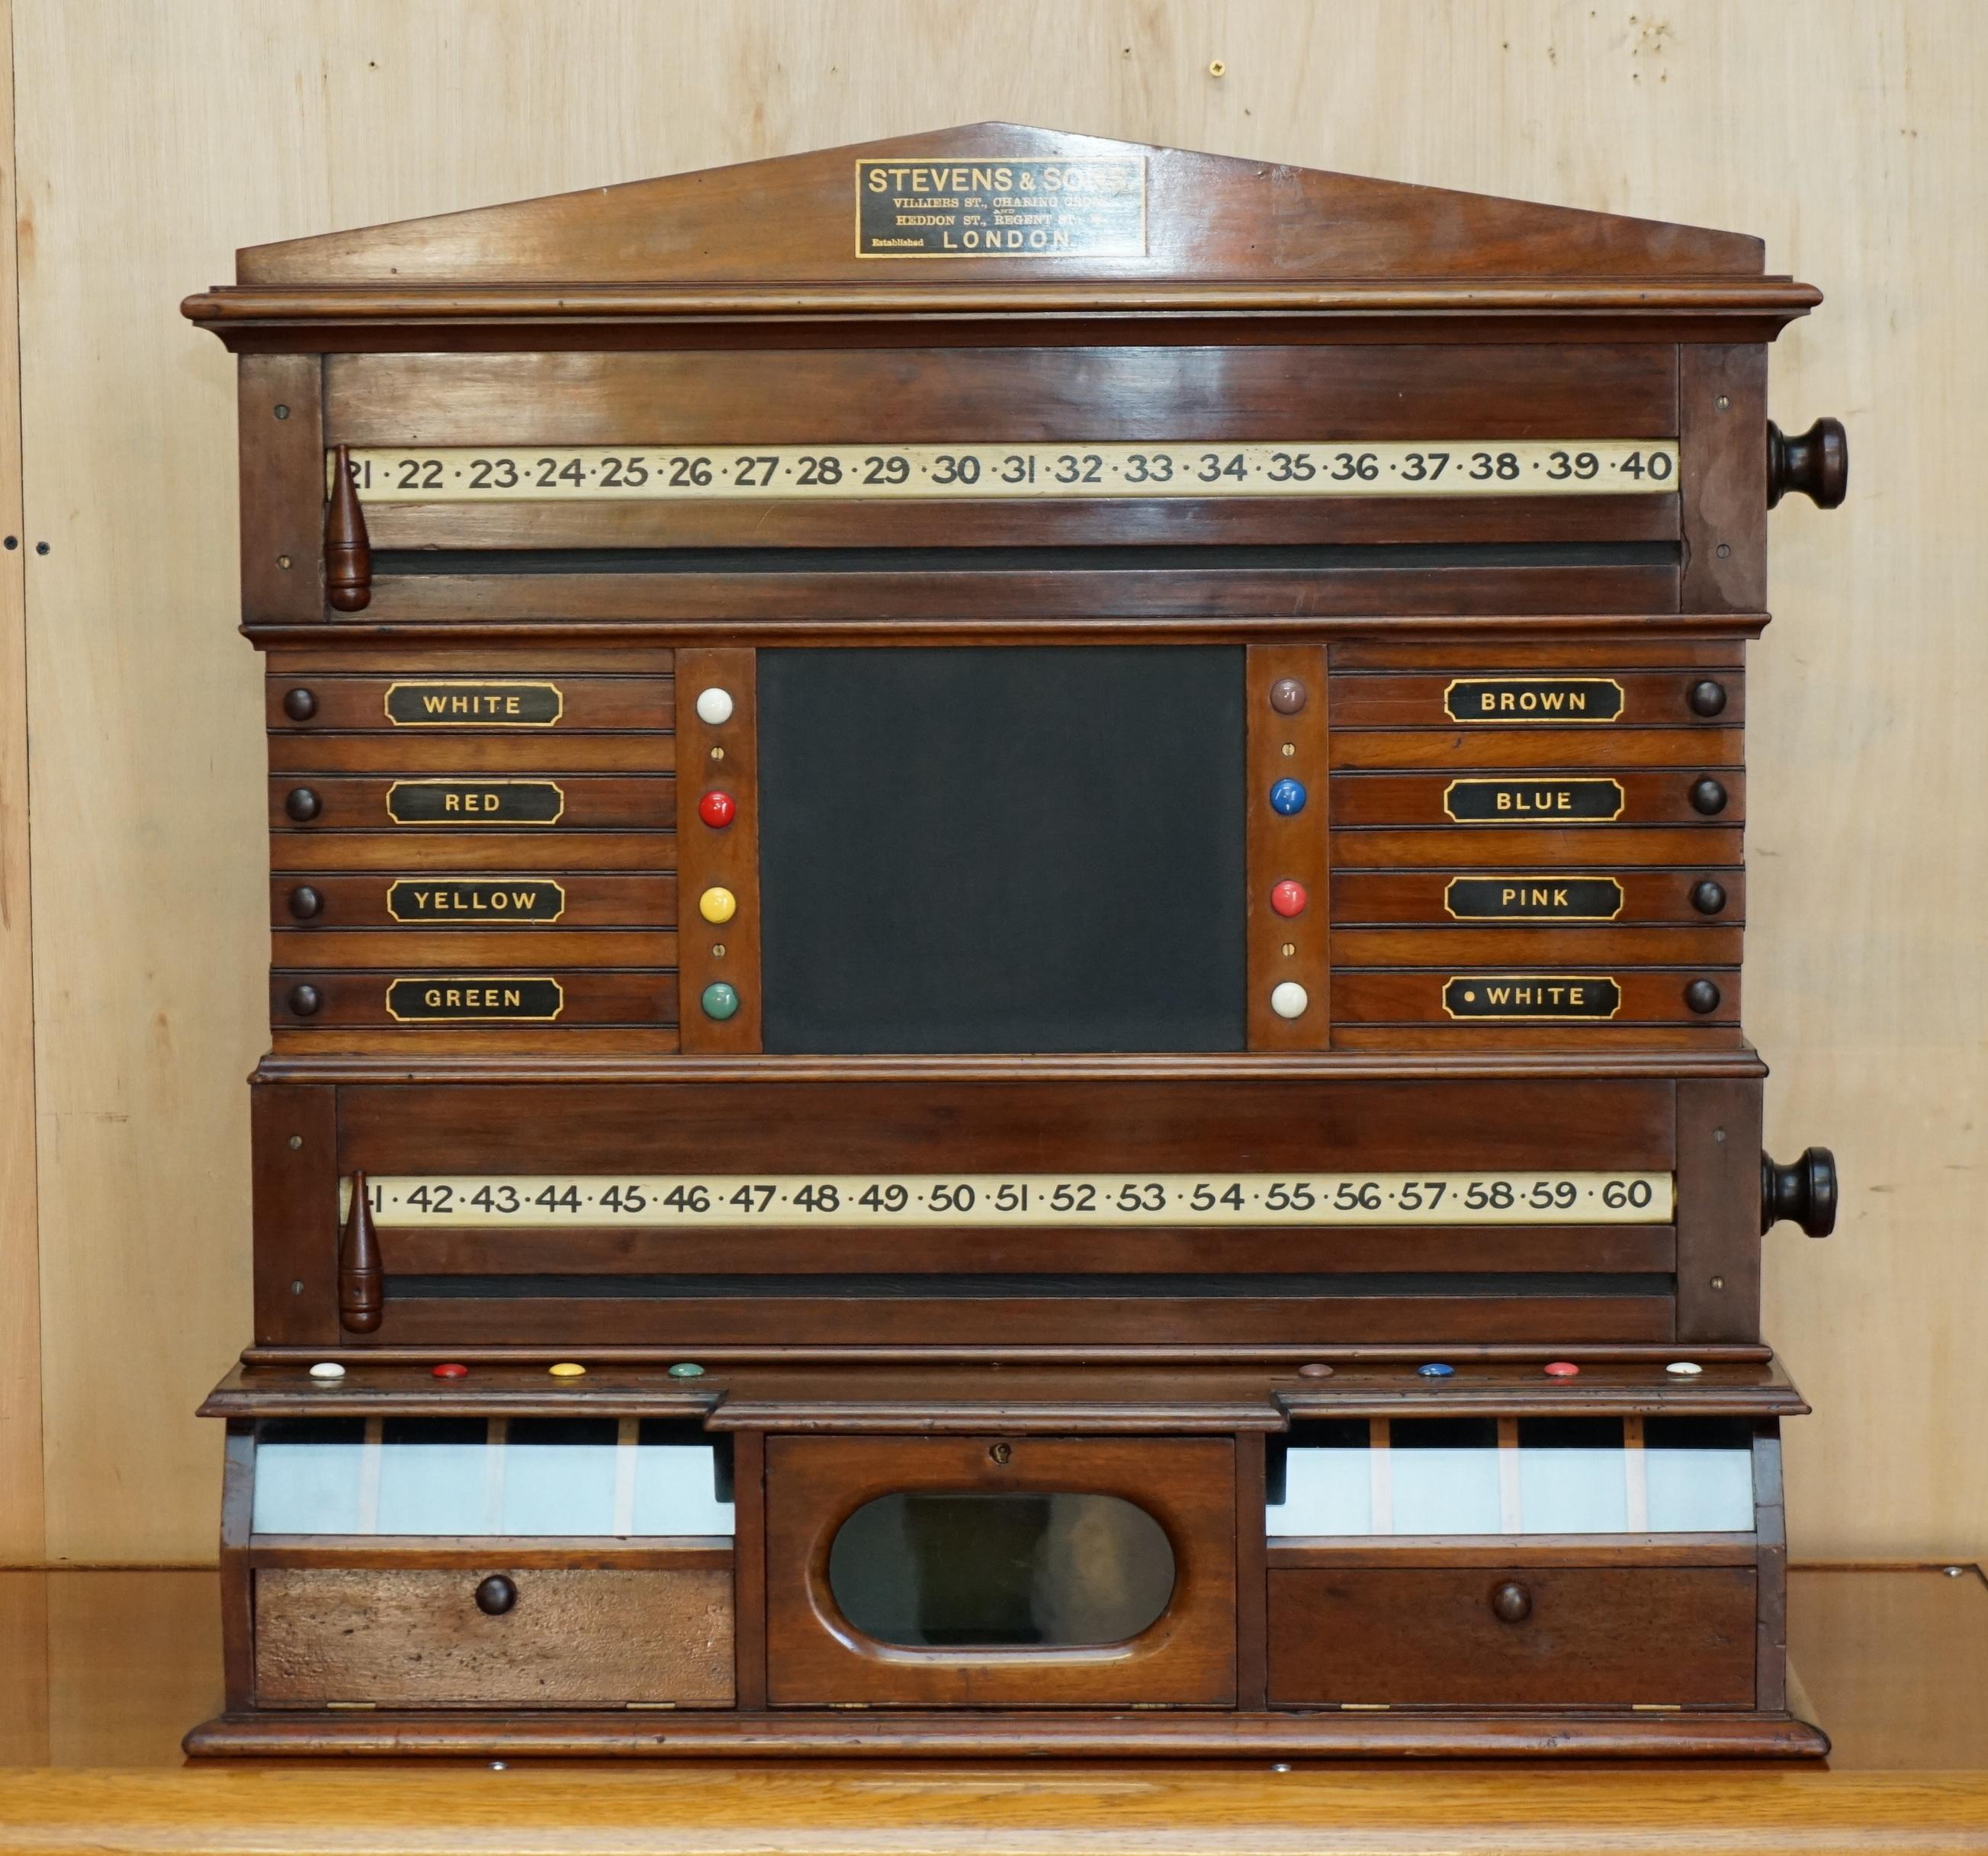 Royal House Antiques

Royal House Antiques is delighted to offer for sale this absolutely exquisite lightly restored Steven & Son's Regent street London Est 1830 Mahogany Snooker scoreboard

A truly stunning example of Victorian Snooker equipment,